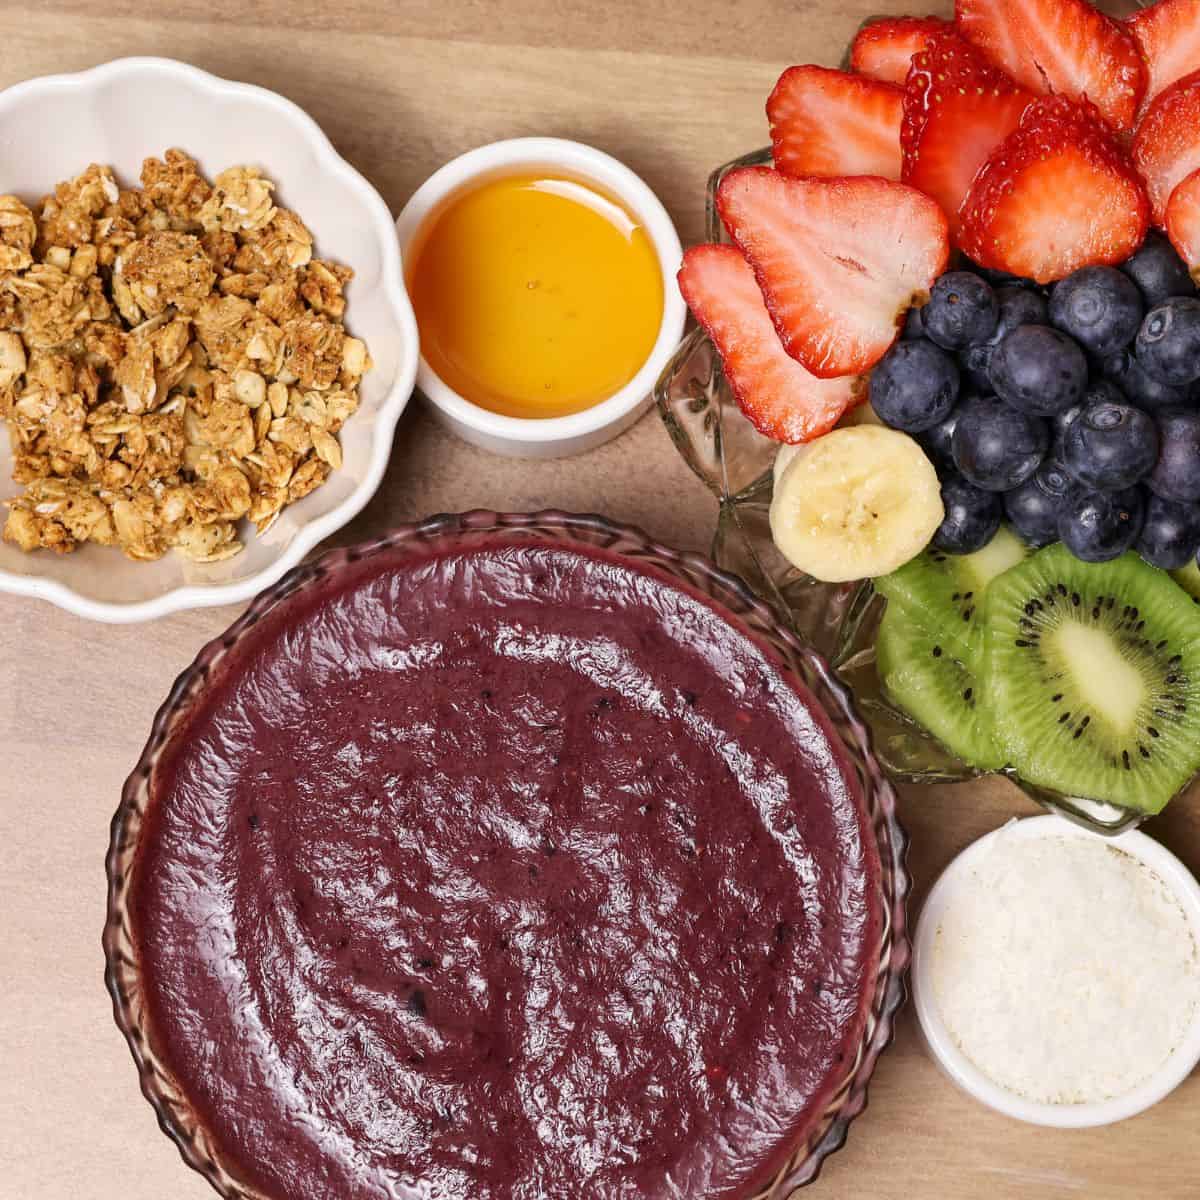 A bowl of blended açaí base ready for toppings, with separate bowls of cut fruits, granola, honey, and shredded coconut beside it.